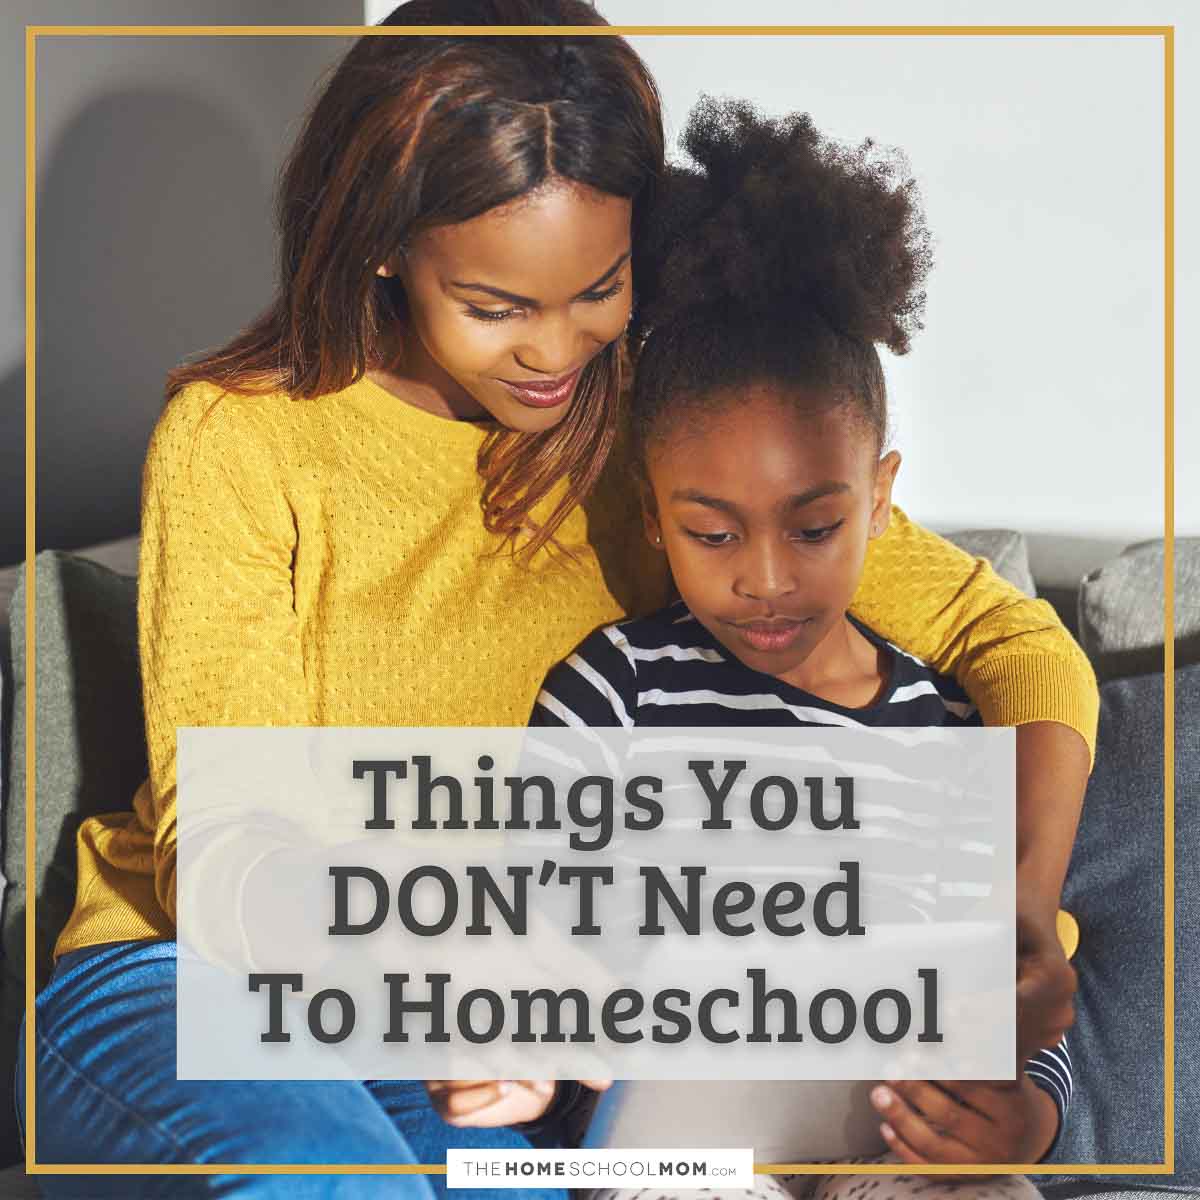 Things you don't need to homeschool.